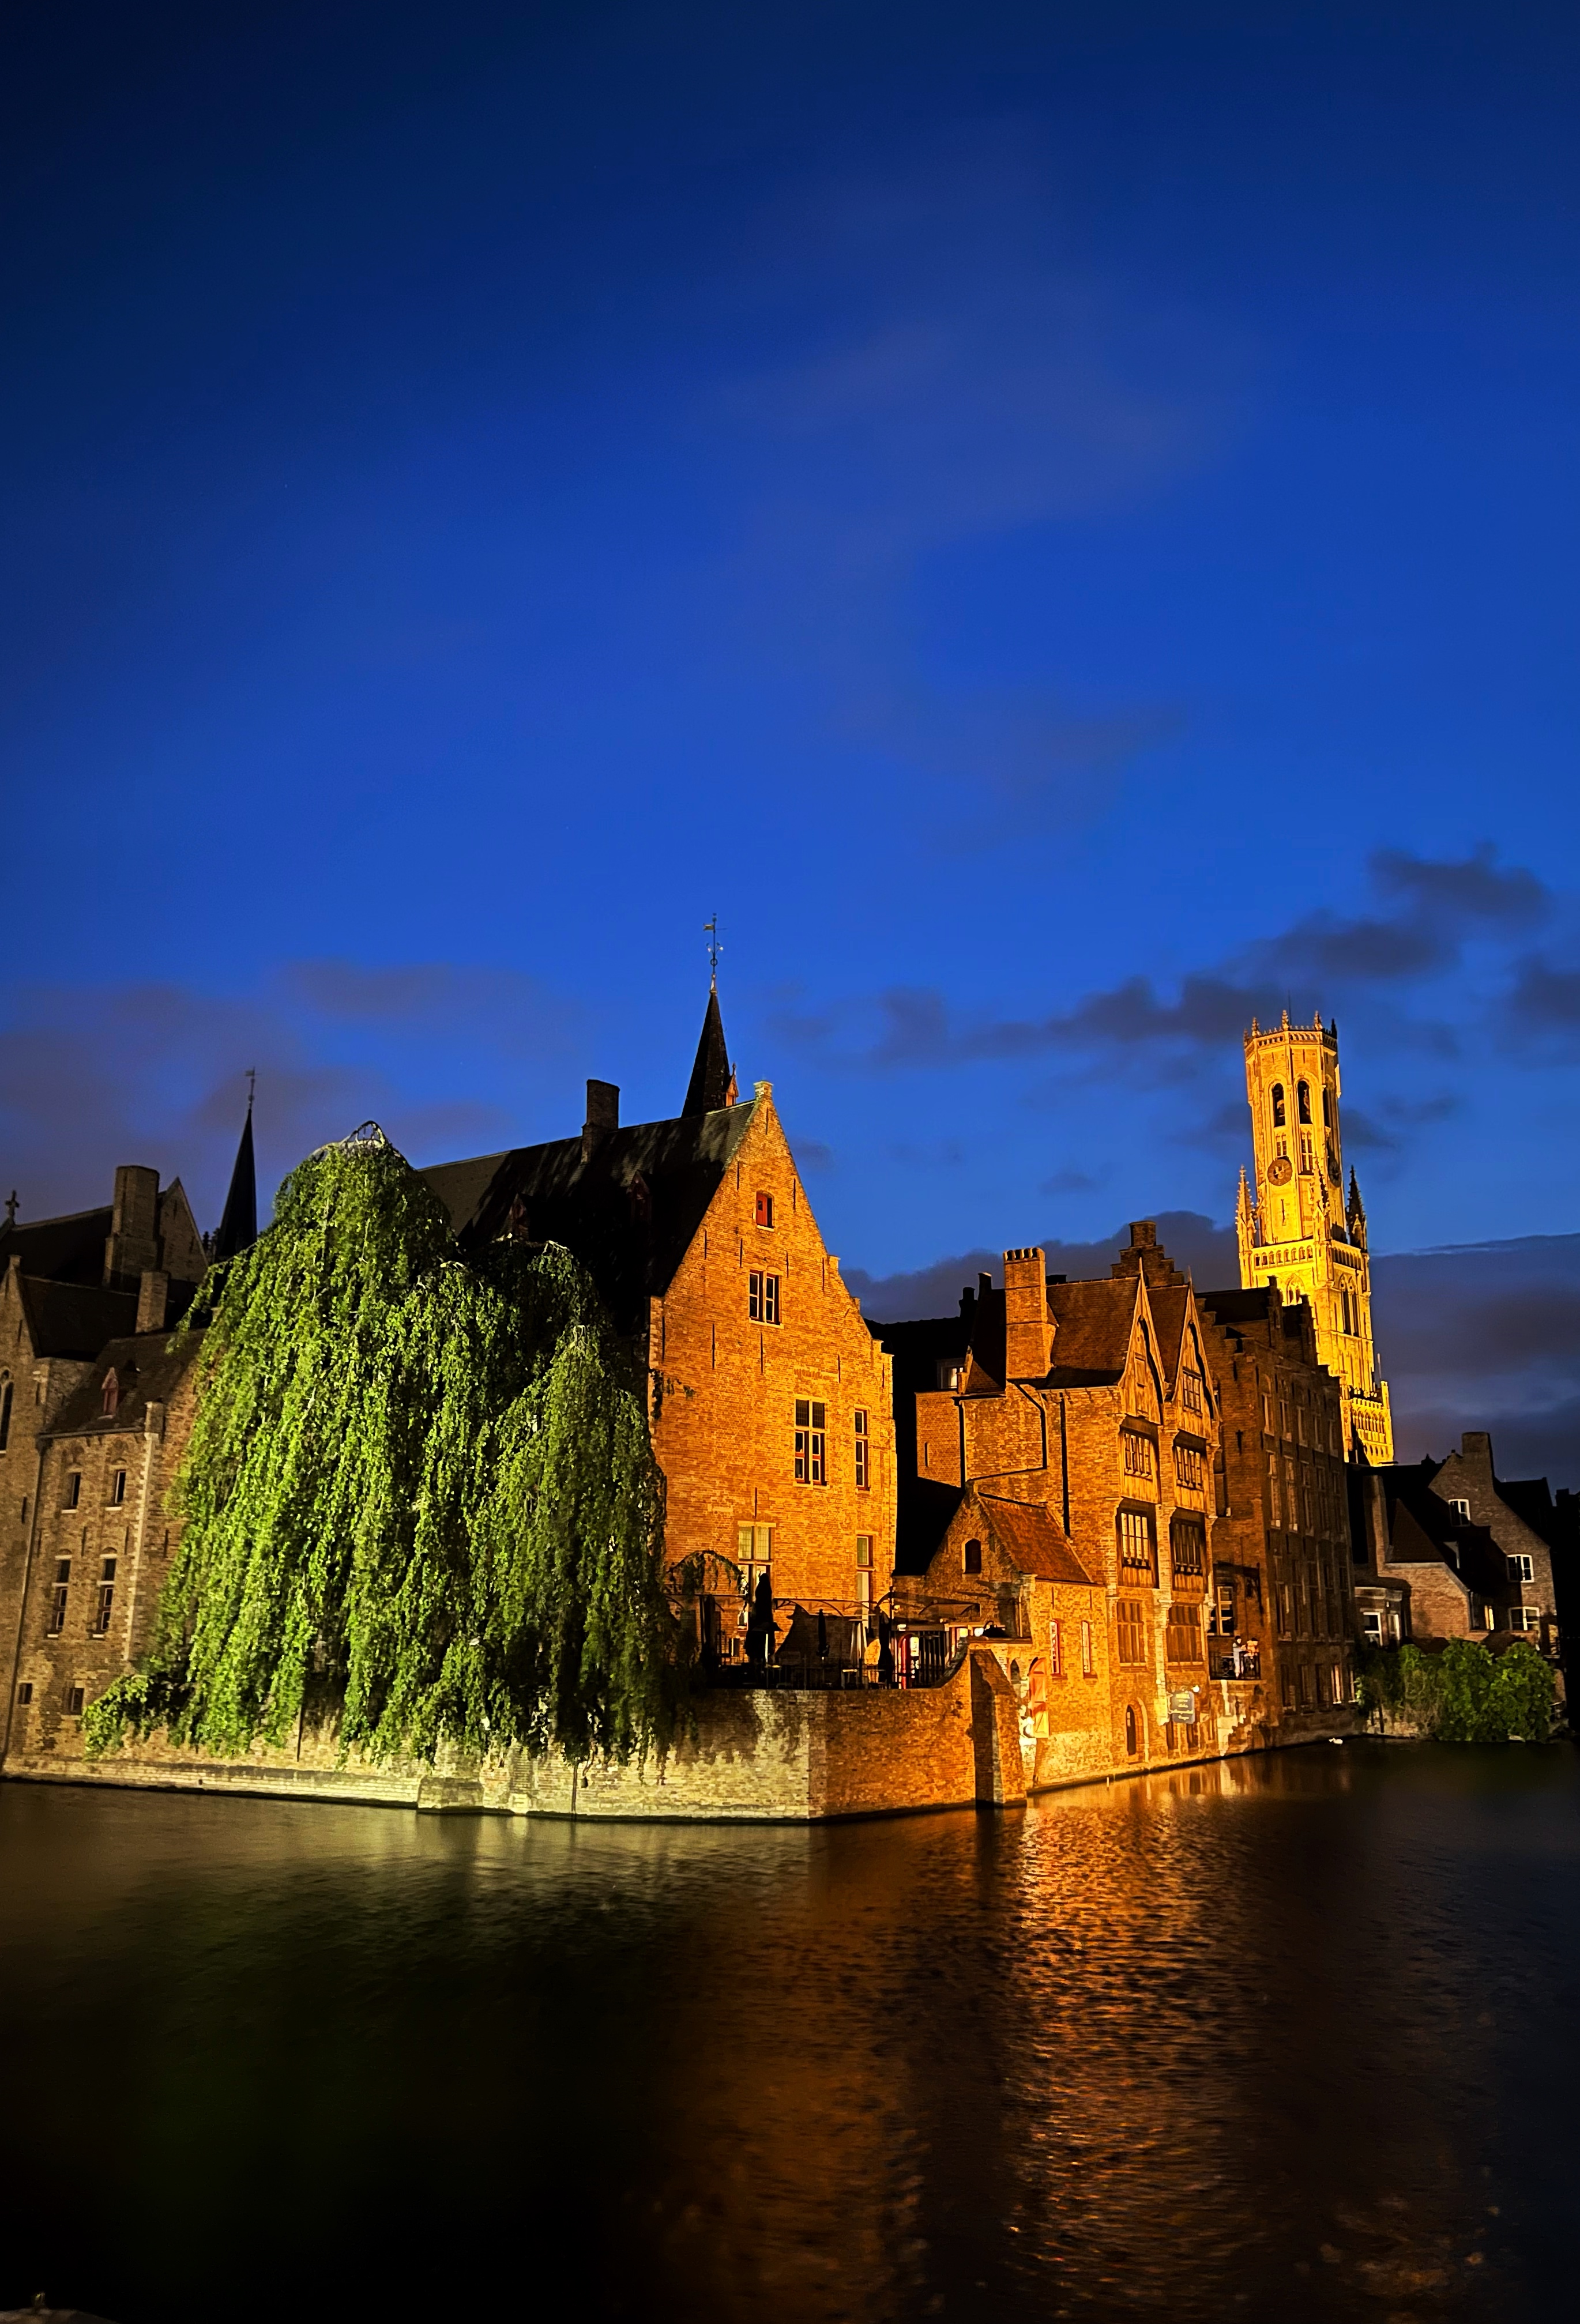 Adrienne Nguyen_Bruges Belgium Boat Tour_Swans_rozenhoedkaai_Quay of the Rosary at Night_Bruges at Night